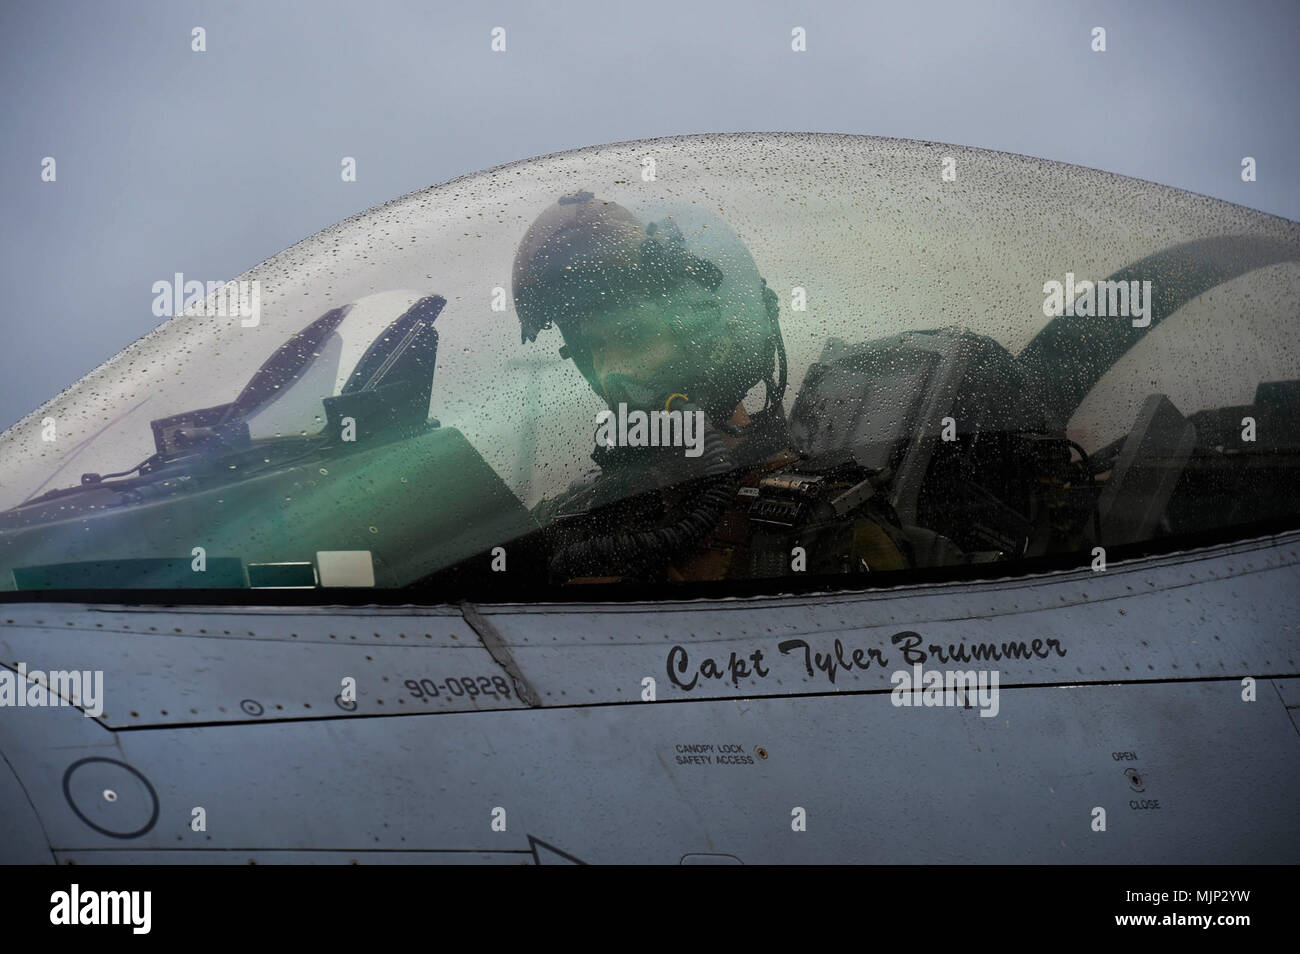 U.S. Air Force Capt. Tyler Brummer, 480th Fighter Squadron pilot, sits in his F-16 Fighting Falcon while receiving fuel during a Hot Pit exercise as part of a two-week exercise at Spangdahlem Air Base, Germany, Mar. 13, 2018. Brummer is one of many pilots who patrols the skies during the exercise to stay prepared for real world scenarios. Armed Forces and civilians displaying courage bravery dedication commitment and sacrifice Stock Photo